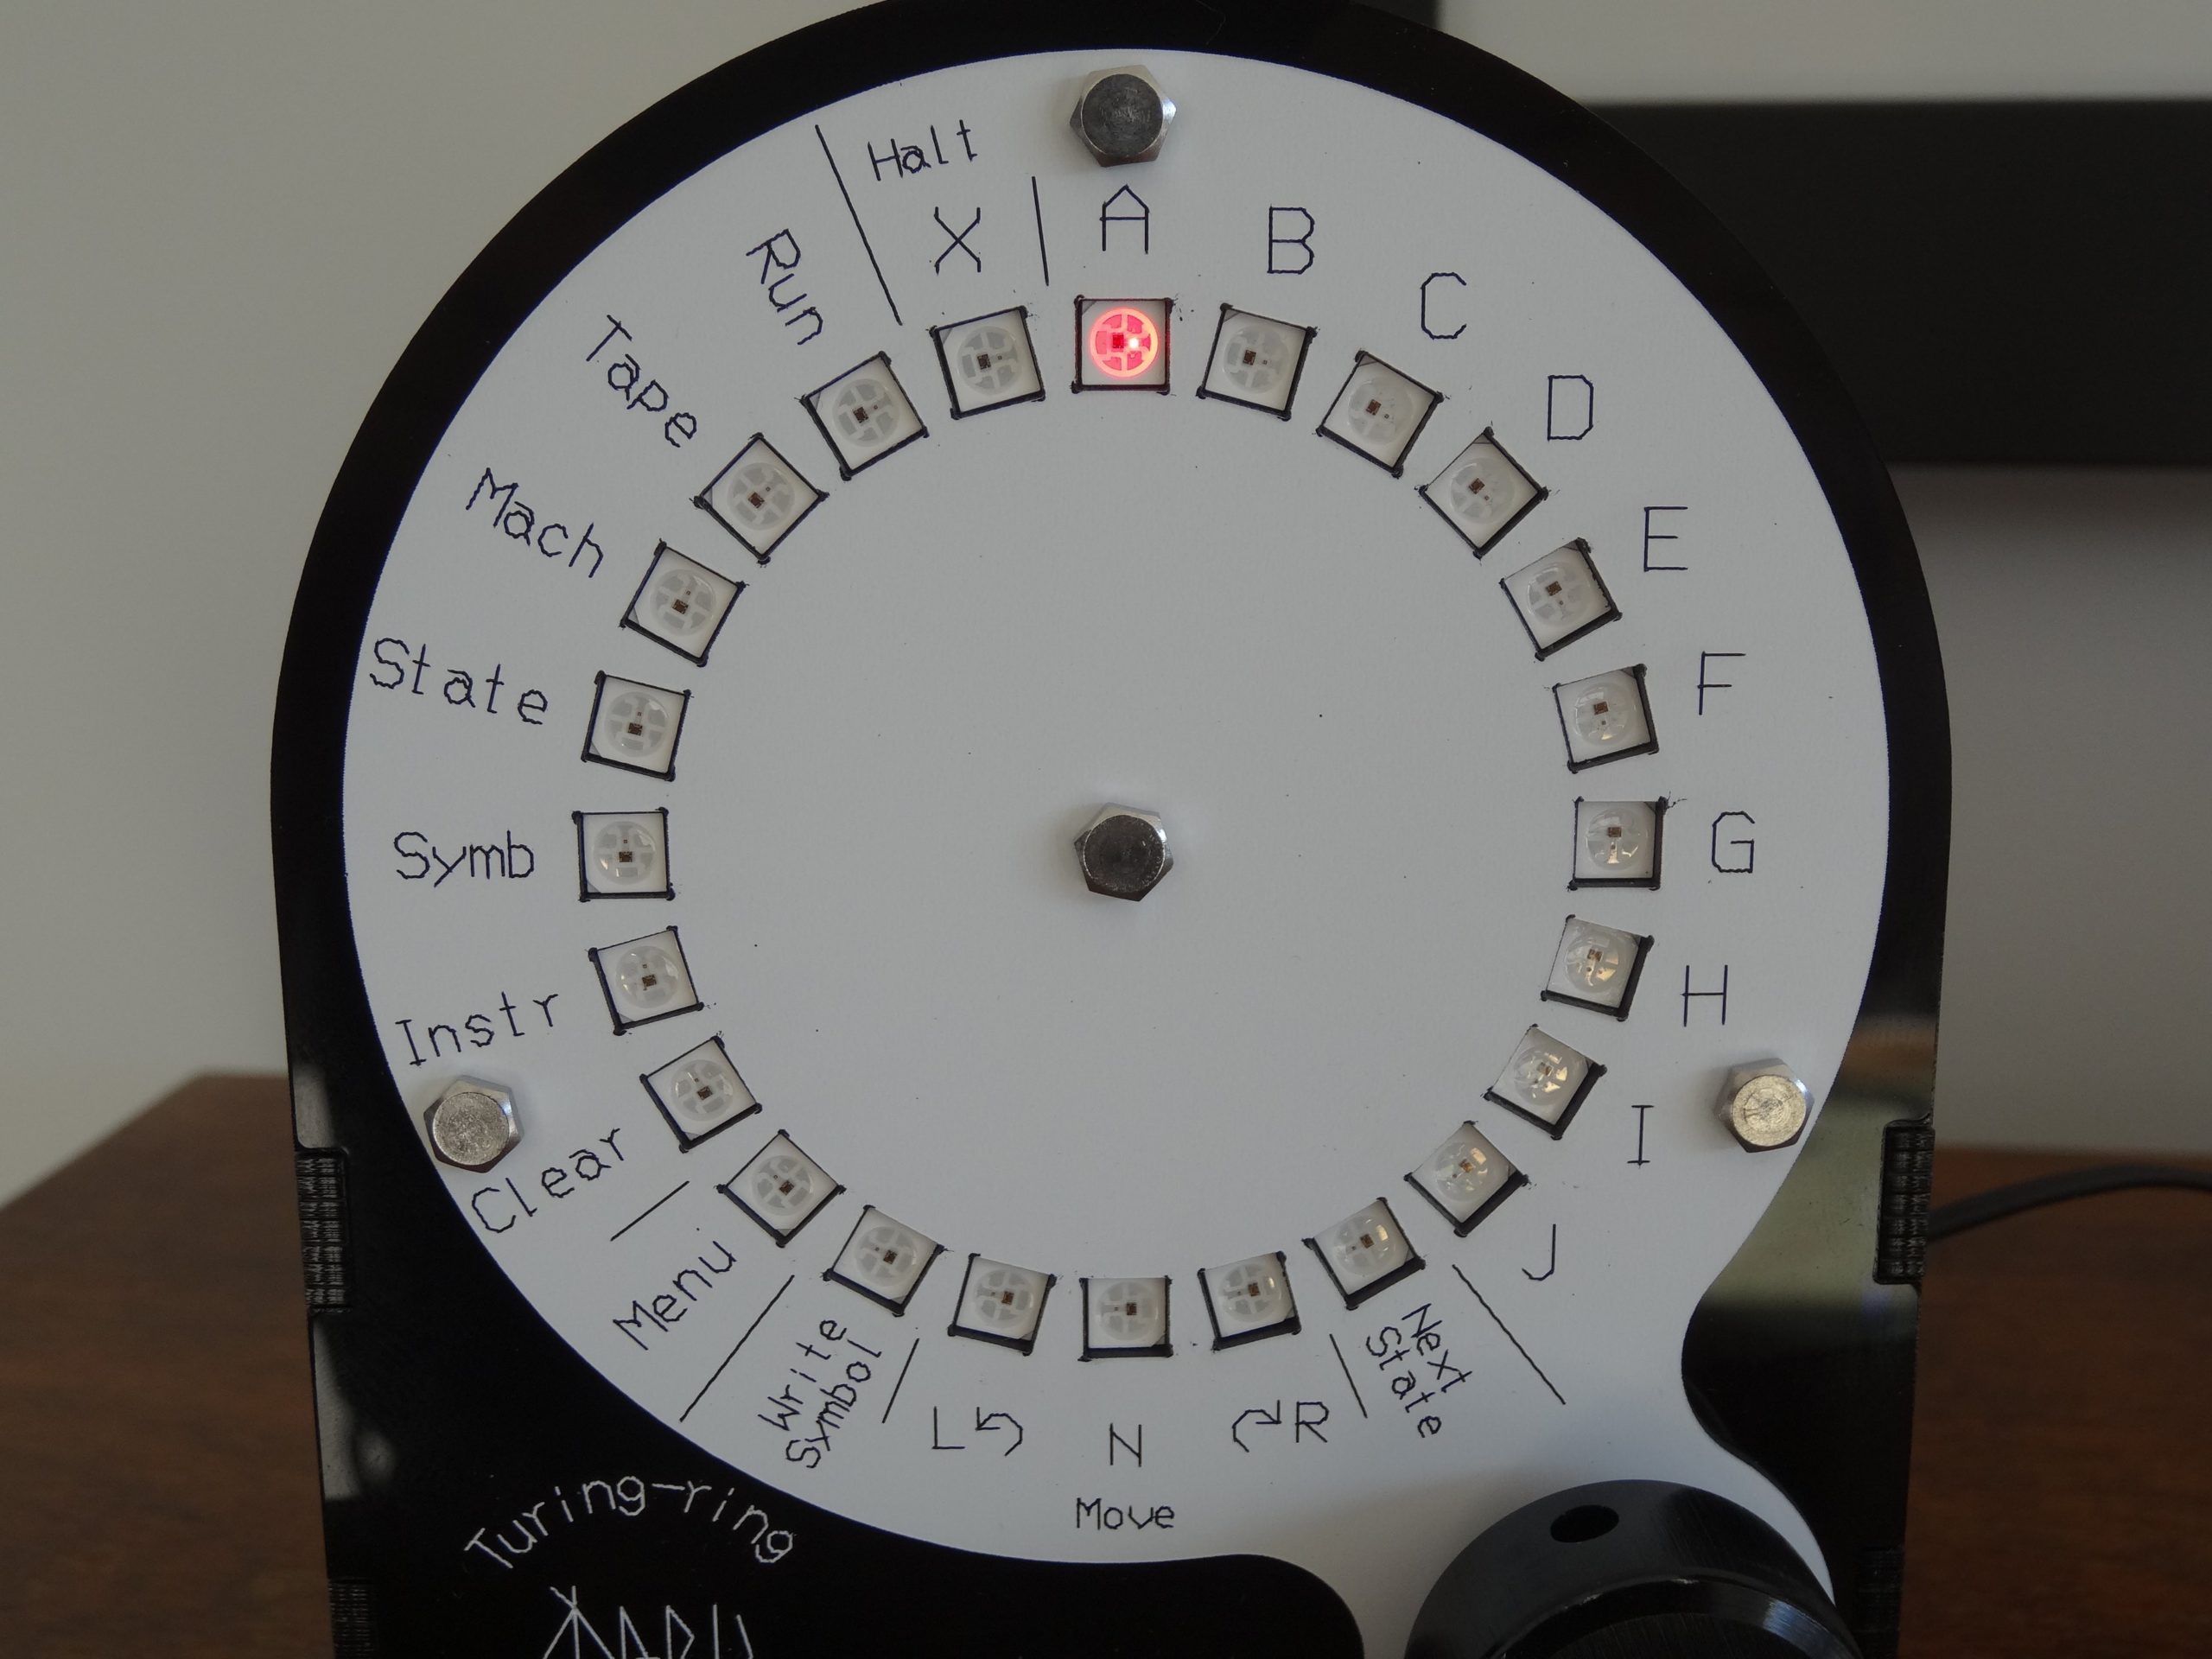 Turing-ring is a DIY Turing machine consisting of an Arduino and an RGB LED ring